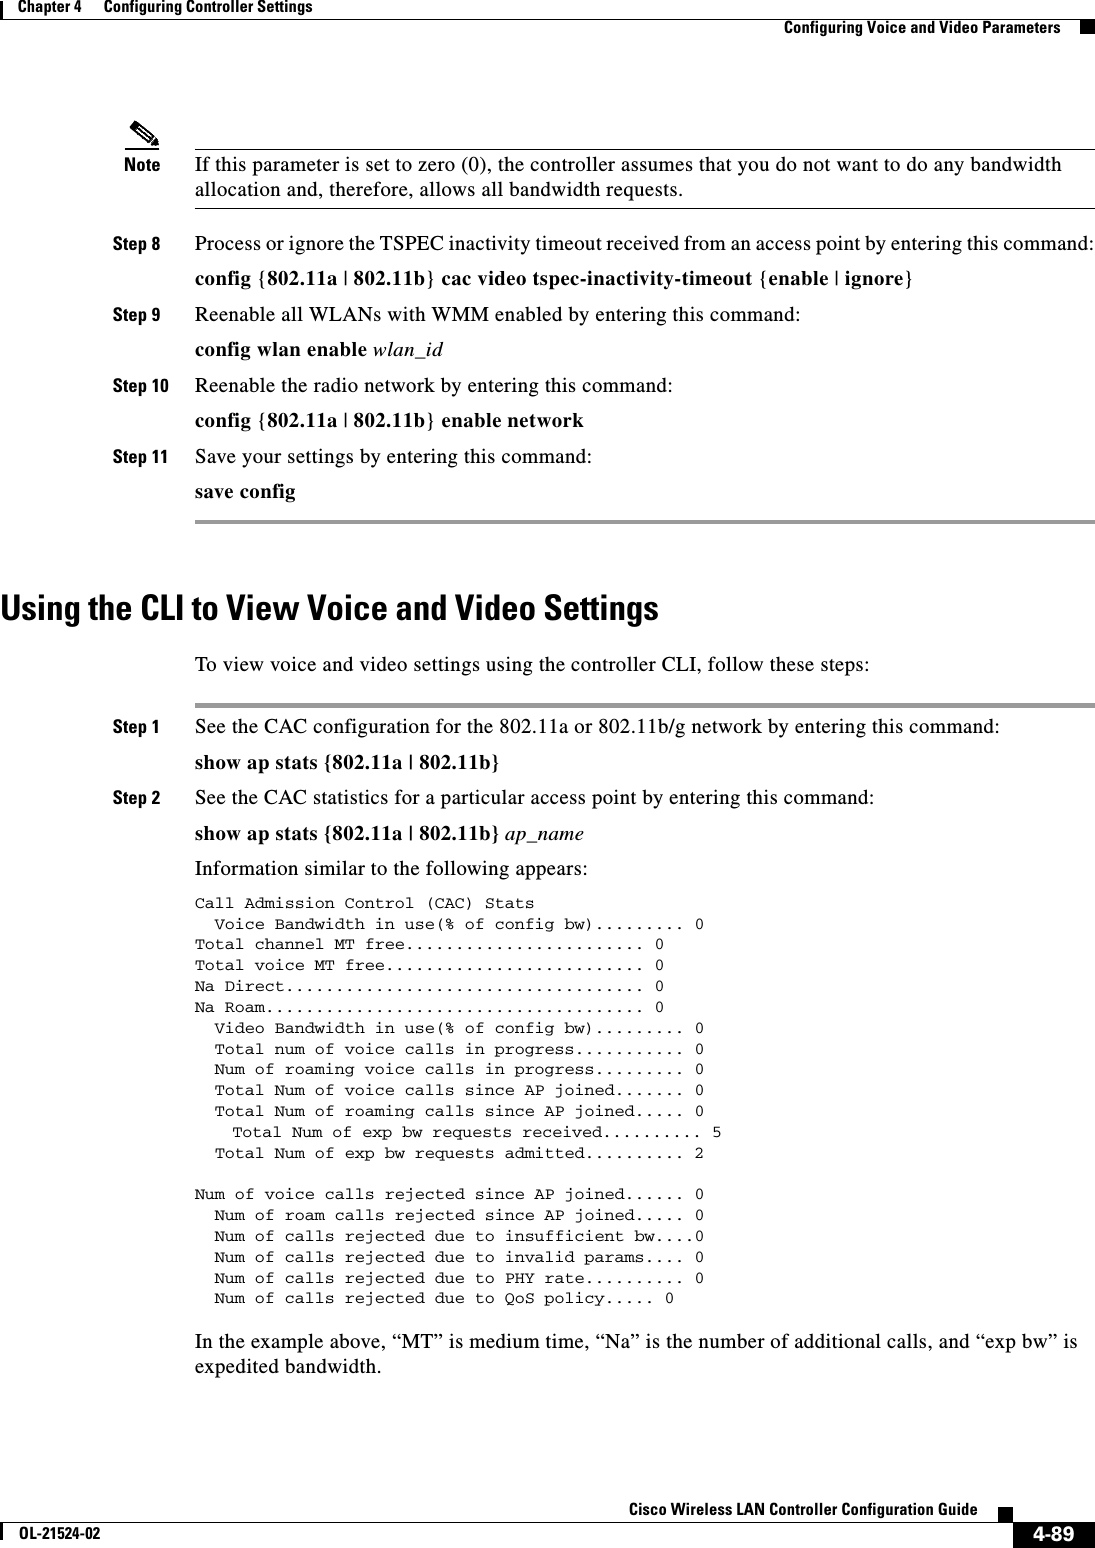  4-89Cisco Wireless LAN Controller Configuration GuideOL-21524-02Chapter 4      Configuring Controller SettingsConfiguring Voice and Video ParametersNote If this parameter is set to zero (0), the controller assumes that you do not want to do any bandwidth allocation and, therefore, allows all bandwidth requests.Step 8 Process or ignore the TSPEC inactivity timeout received from an access point by entering this command:config {802.11a | 802.11b} cac video tspec-inactivity-timeout {enable | ignore}Step 9 Reenable all WLANs with WMM enabled by entering this command:config wlan enable wlan_idStep 10 Reenable the radio network by entering this command:config {802.11a | 802.11b} enable networkStep 11 Save your settings by entering this command:save configUsing the CLI to View Voice and Video Settings To view voice and video settings using the controller CLI, follow these steps:Step 1 See the CAC configuration for the 802.11a or 802.11b/g network by entering this command:show ap stats {802.11a | 802.11b}Step 2 See the CAC statistics for a particular access point by entering this command:show ap stats {802.11a | 802.11b} ap_nameInformation similar to the following appears:Call Admission Control (CAC) Stats  Voice Bandwidth in use(% of config bw)......... 0Total channel MT free........................ 0Total voice MT free.......................... 0Na Direct.................................... 0Na Roam...................................... 0  Video Bandwidth in use(% of config bw)......... 0  Total num of voice calls in progress........... 0  Num of roaming voice calls in progress......... 0  Total Num of voice calls since AP joined....... 0  Total Num of roaming calls since AP joined..... 0Total Num of exp bw requests received.......... 5  Total Num of exp bw requests admitted.......... 2 Num of voice calls rejected since AP joined...... 0  Num of roam calls rejected since AP joined..... 0  Num of calls rejected due to insufficient bw....0  Num of calls rejected due to invalid params.... 0  Num of calls rejected due to PHY rate.......... 0  Num of calls rejected due to QoS policy..... 0 In the example above, “MT” is medium time, “Na” is the number of additional calls, and “exp bw” is expedited bandwidth.